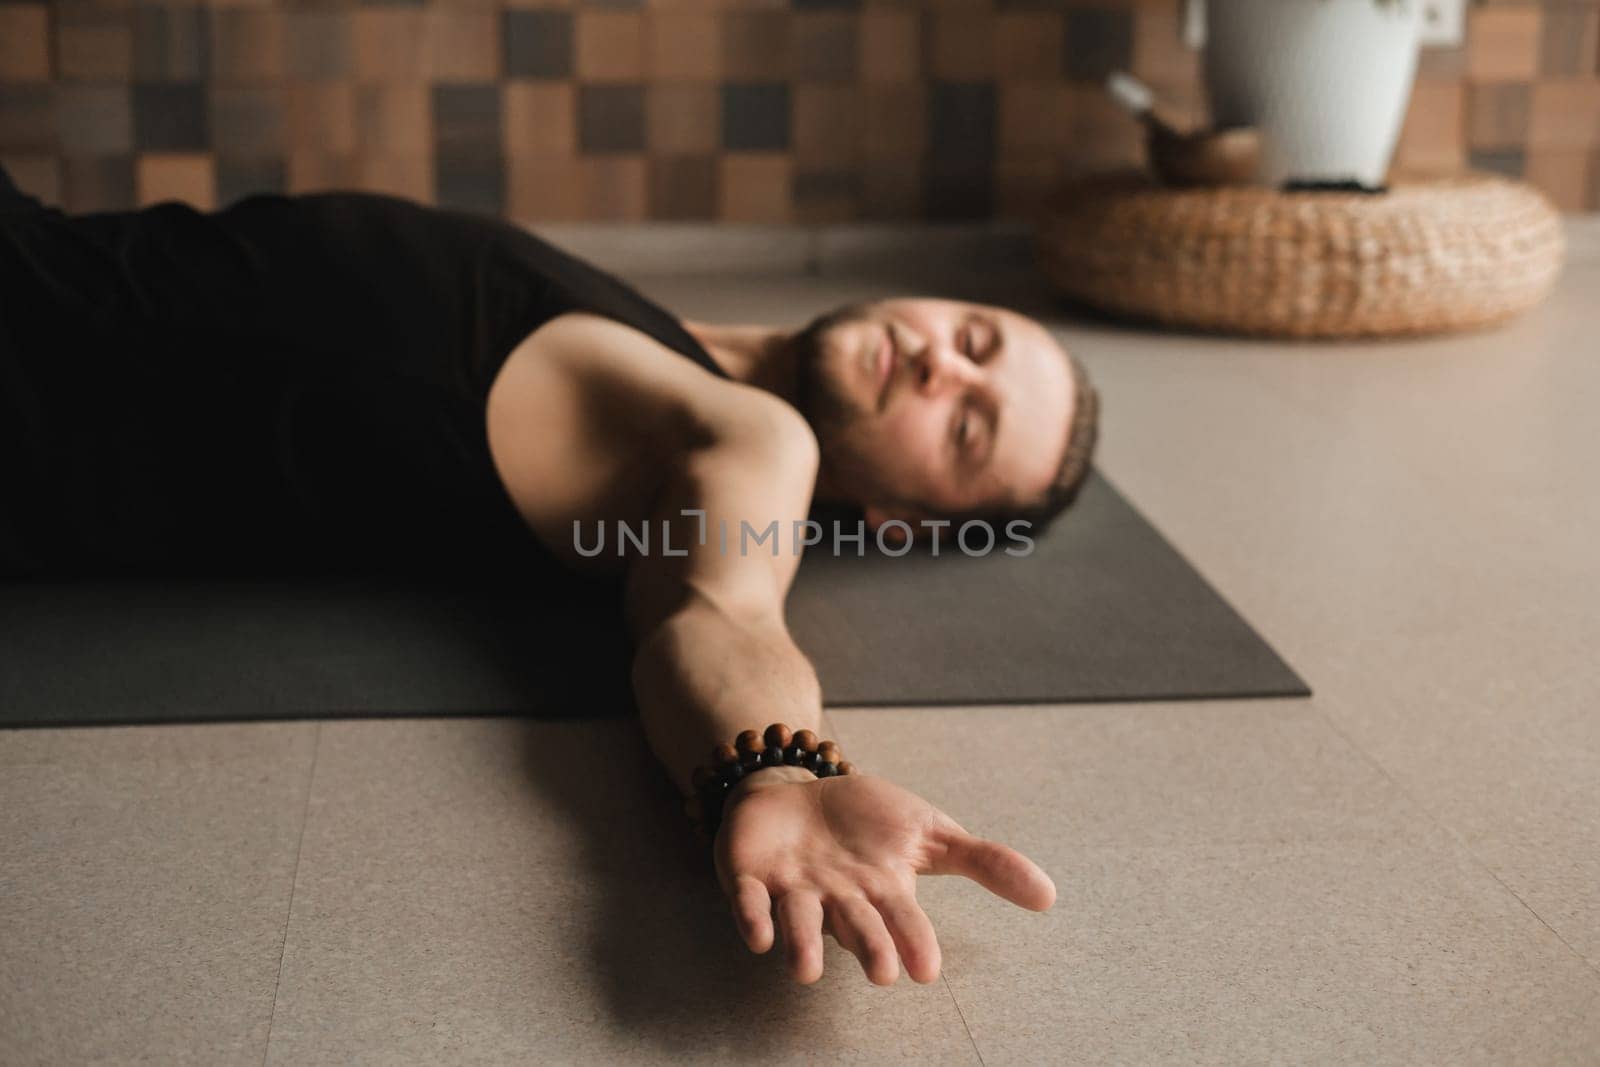 A man performing gymnastic exercises on a yoga mat at home by Lobachad